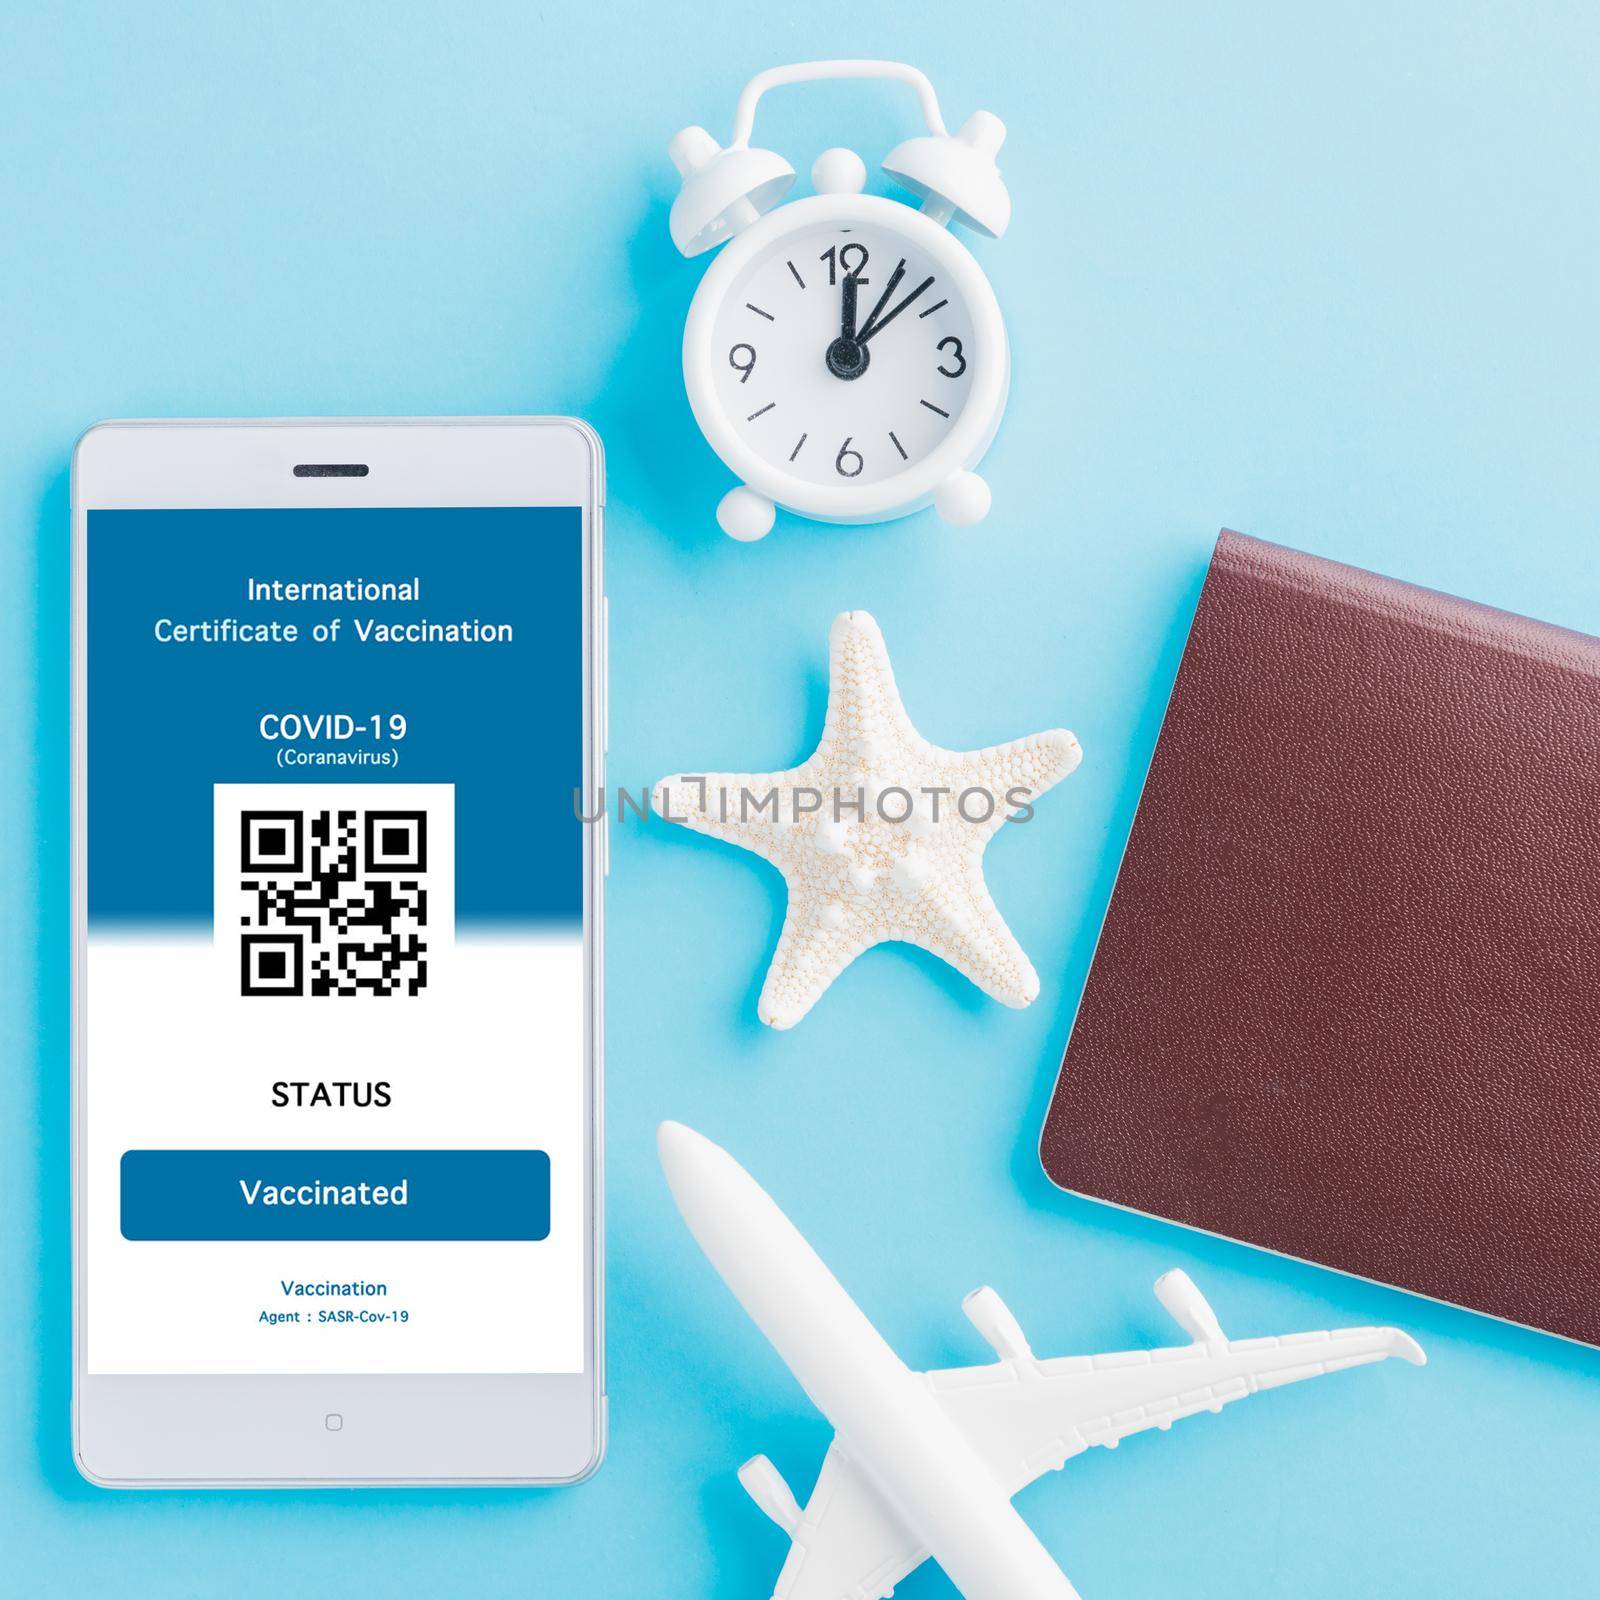 Model airplane, passport and immunity pass are arranged application on smartphone on blue background, Travel concept during Covid-19 pandemic digital International Vaccination Certification concept